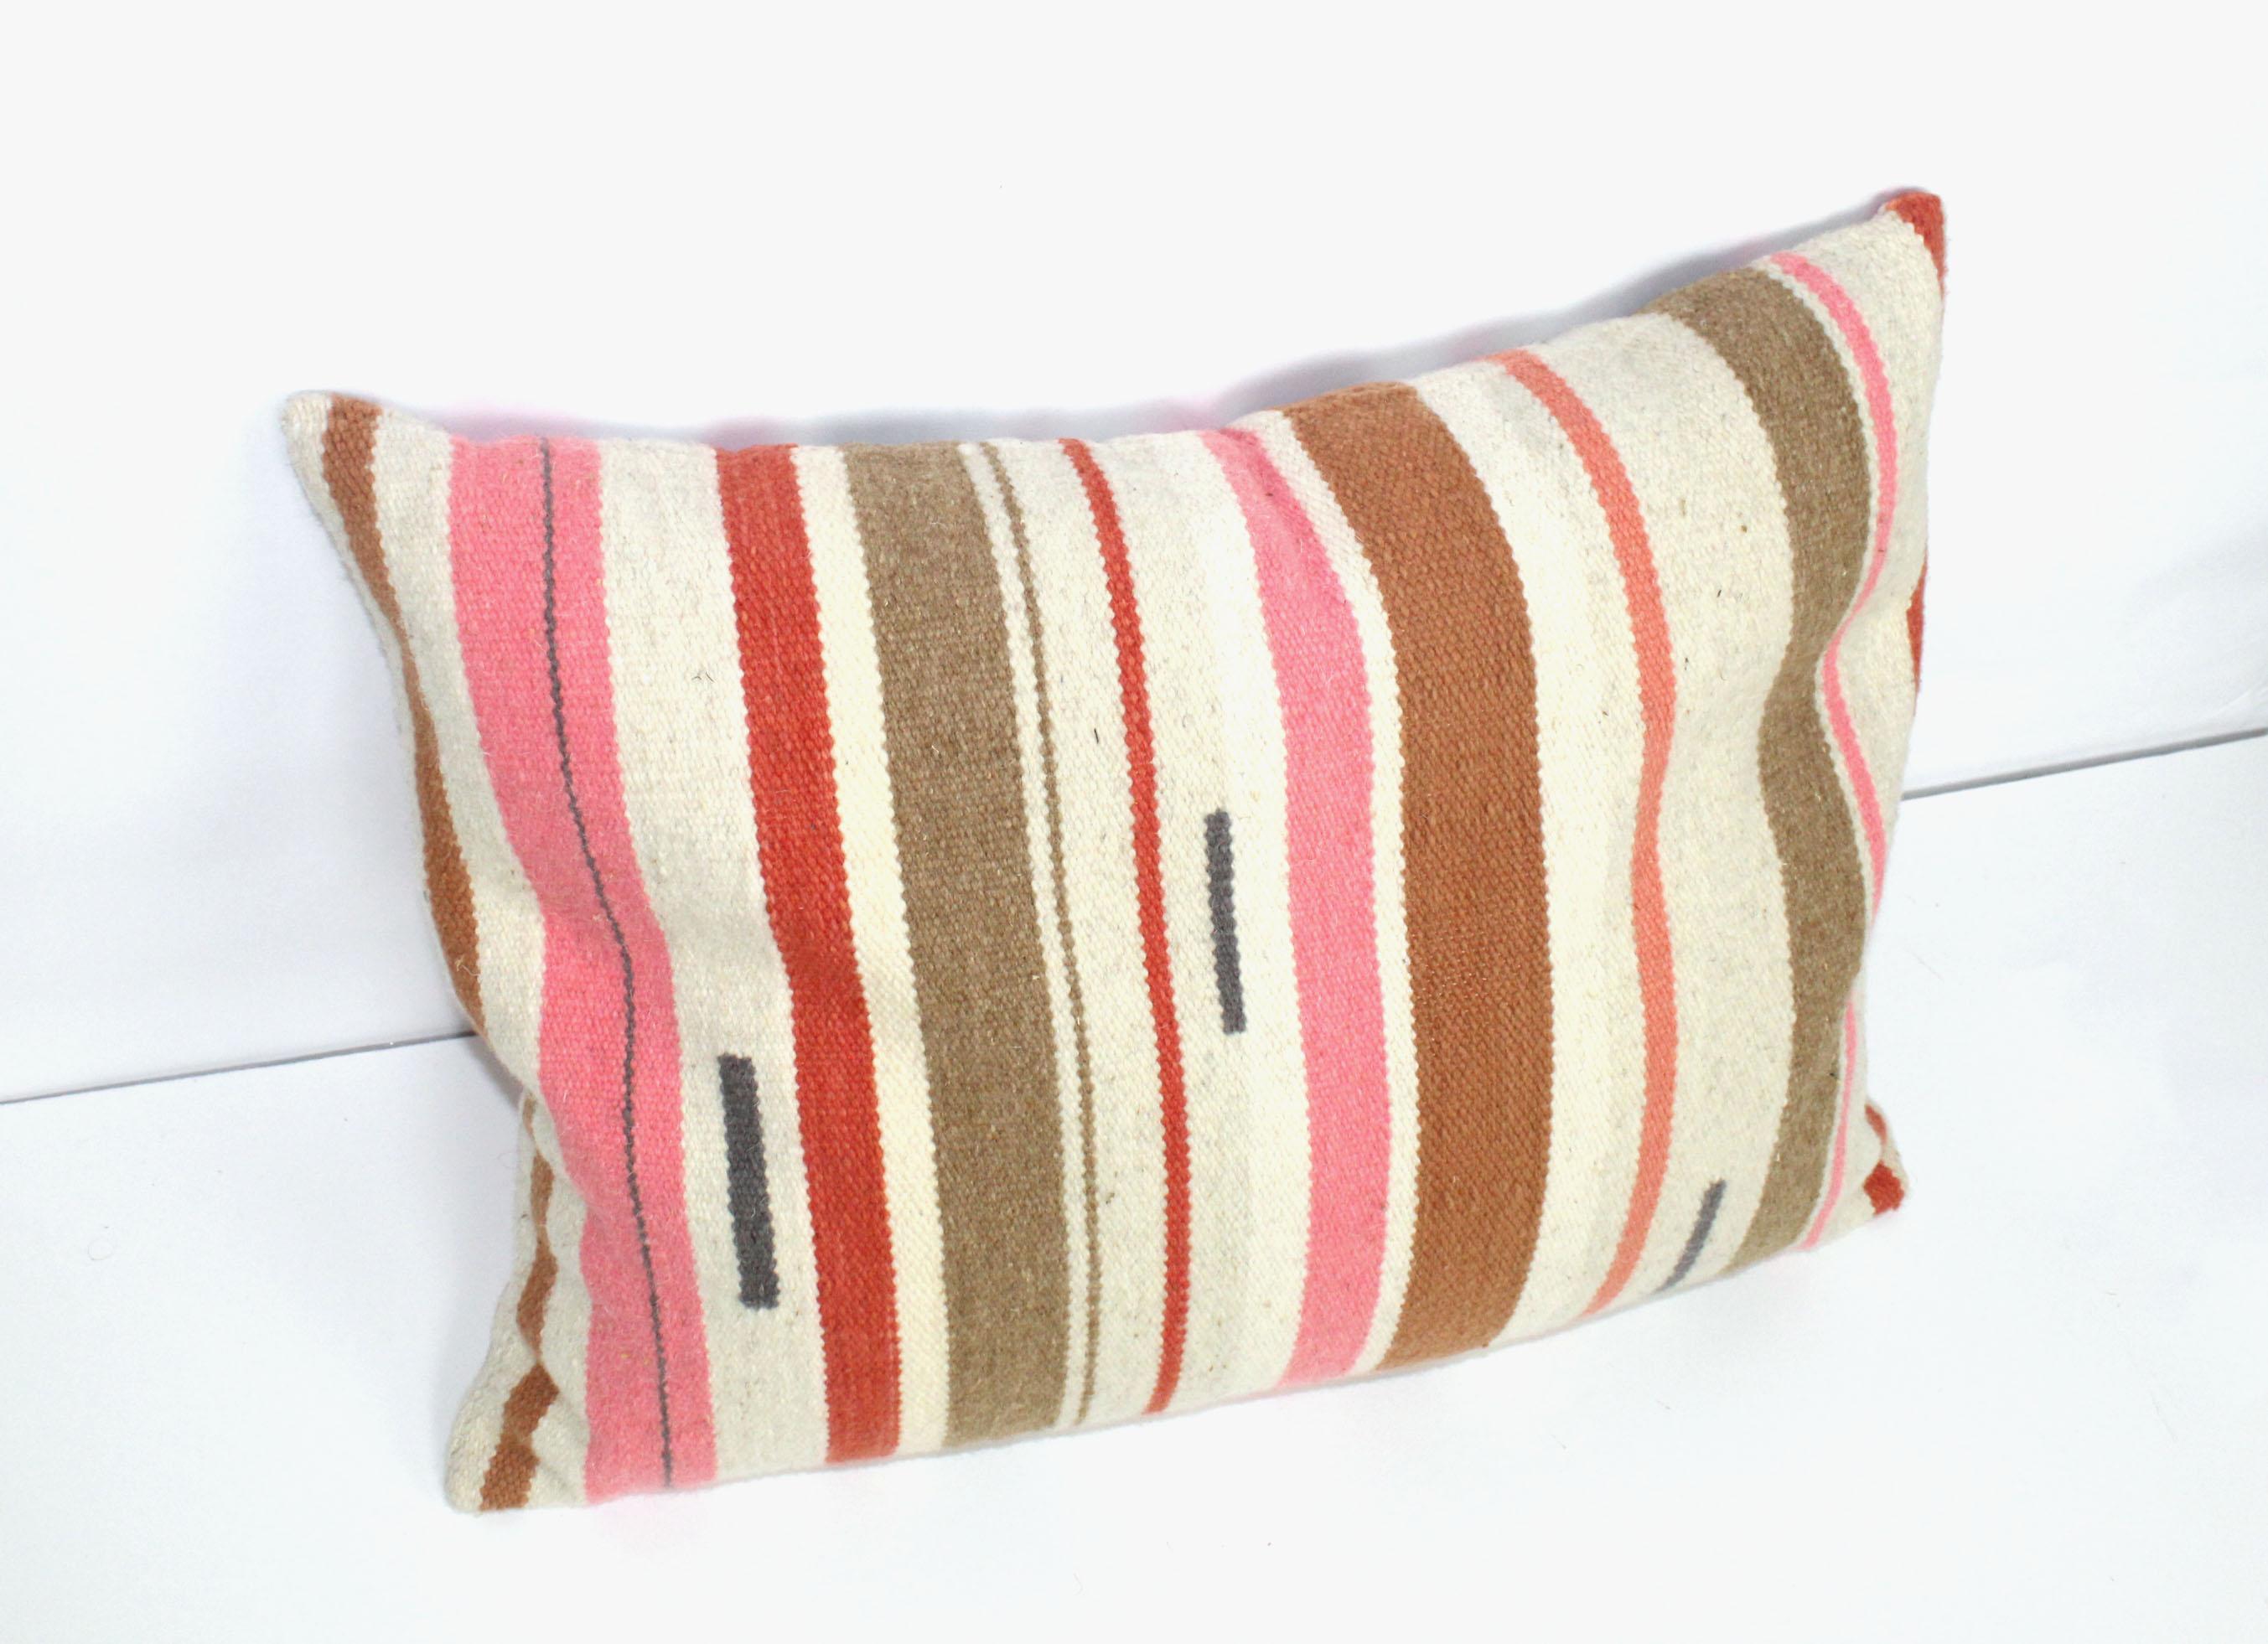 This bespoke pillow is handmade from 100% natural materials in the maker's studio in Brooklyn, NY.

The wool is sourced from a village south Oaxaca, a blend of merino and churro wool, and spun with variations that give it incredible texture while